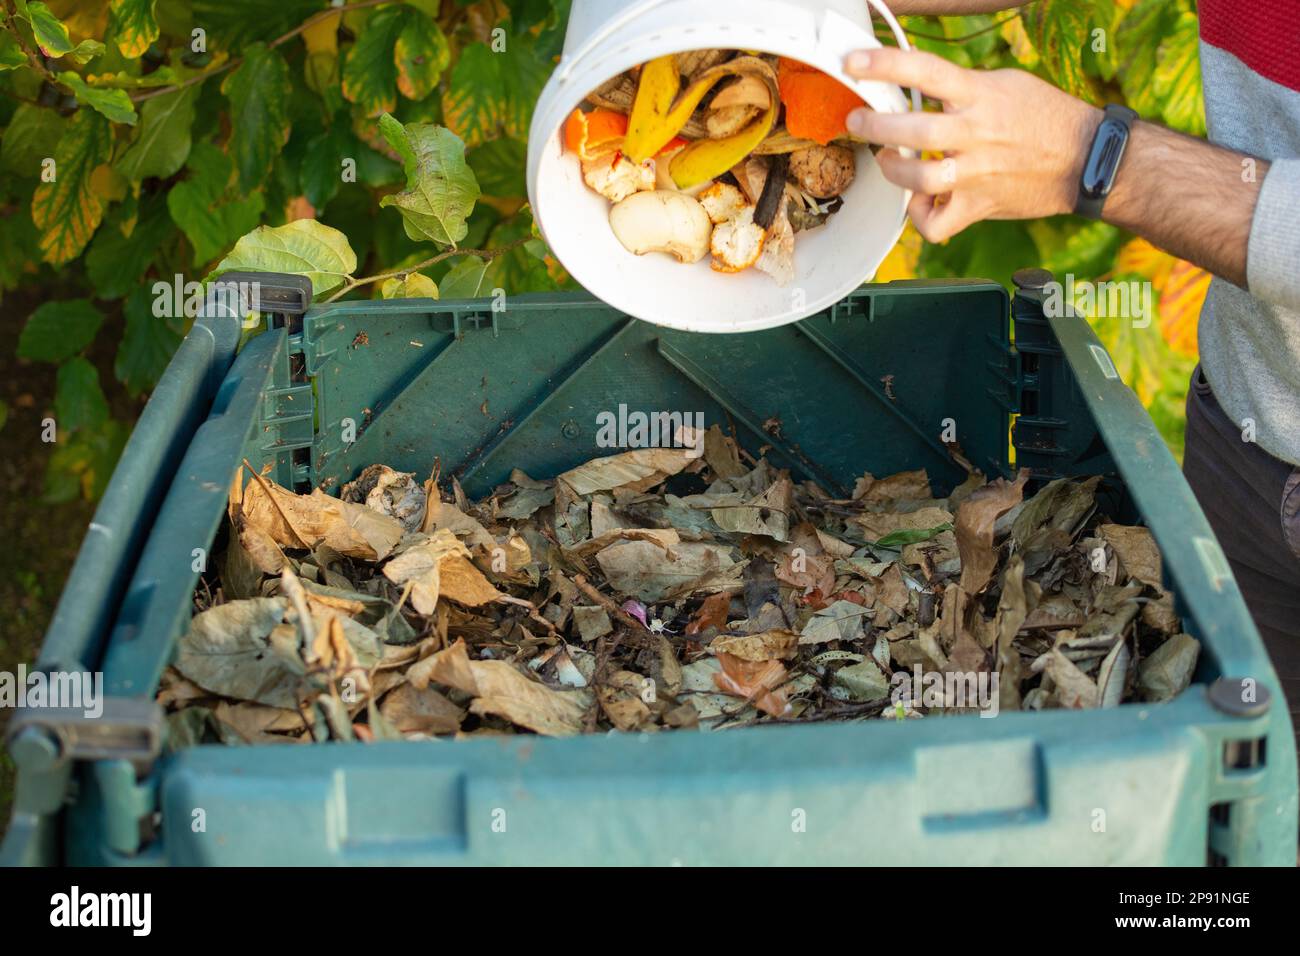 https://c8.alamy.com/comp/2P91NGE/a-young-man-is-emptying-a-bucket-with-organic-waste-in-a-outdoor-compost-binthe-compost-bin-is-placed-in-a-home-garden-to-recycle-organic-waste-produ-2P91NGE.jpg